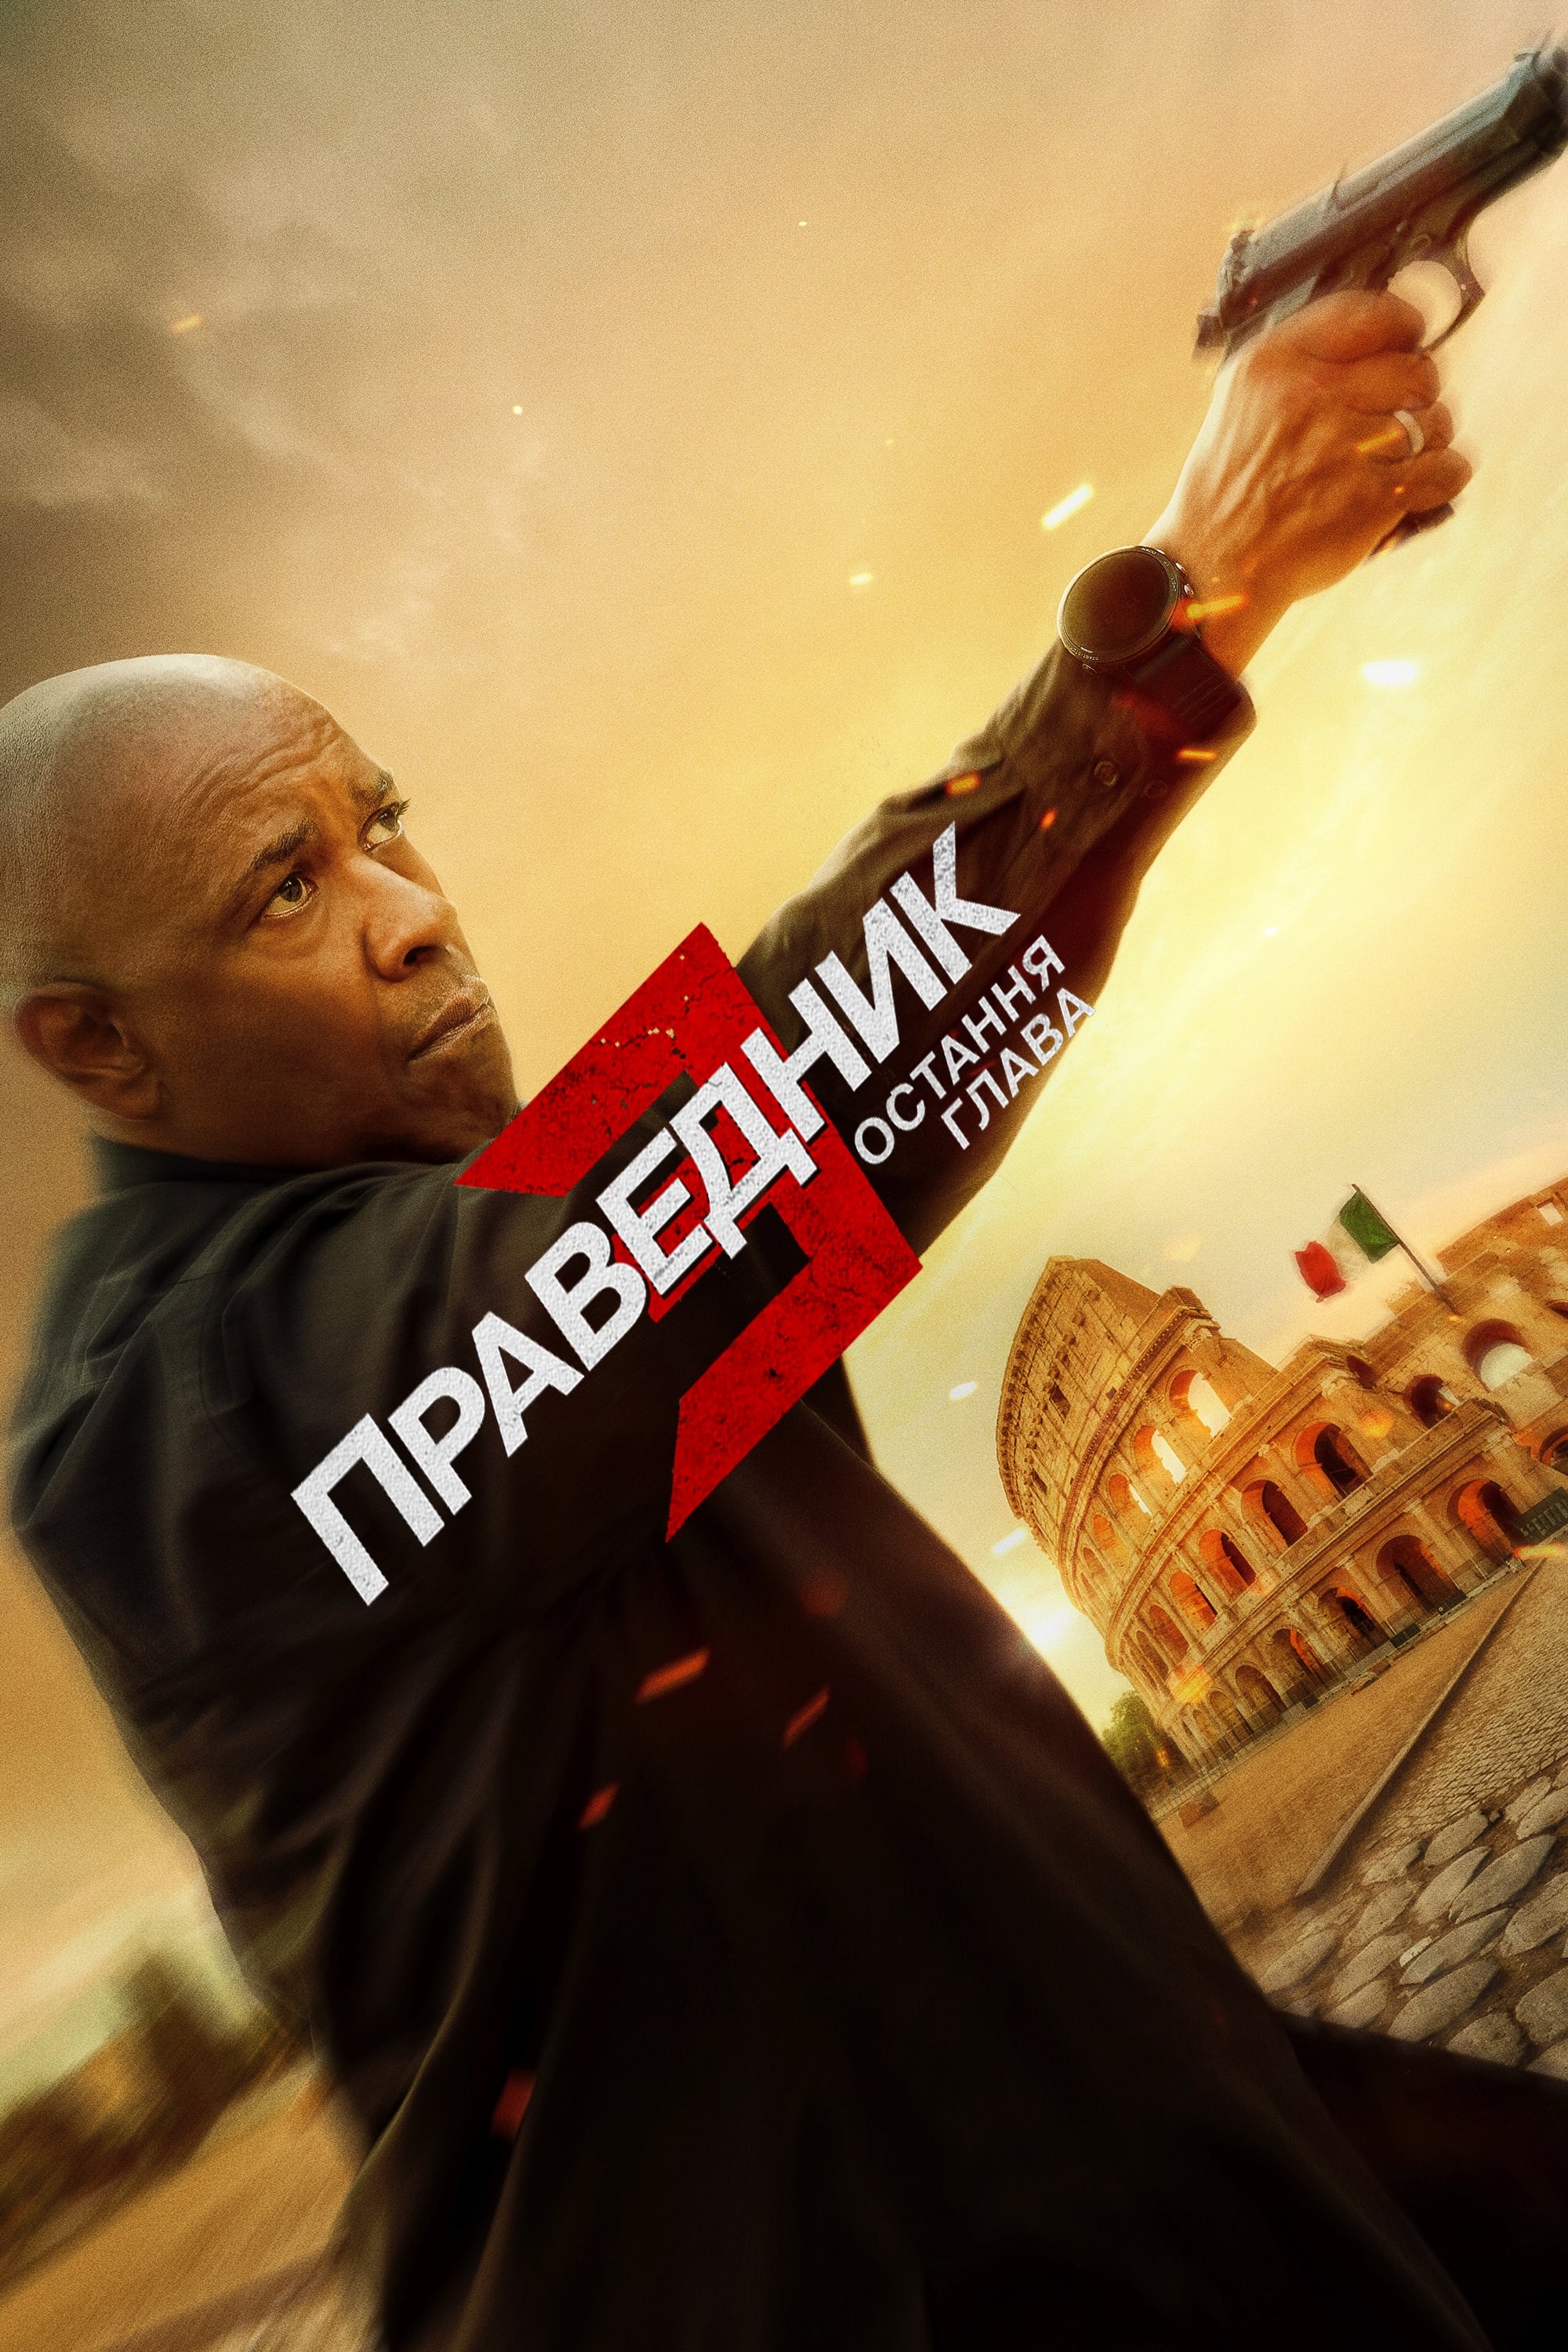 Poster and image movie The Equalizer 3